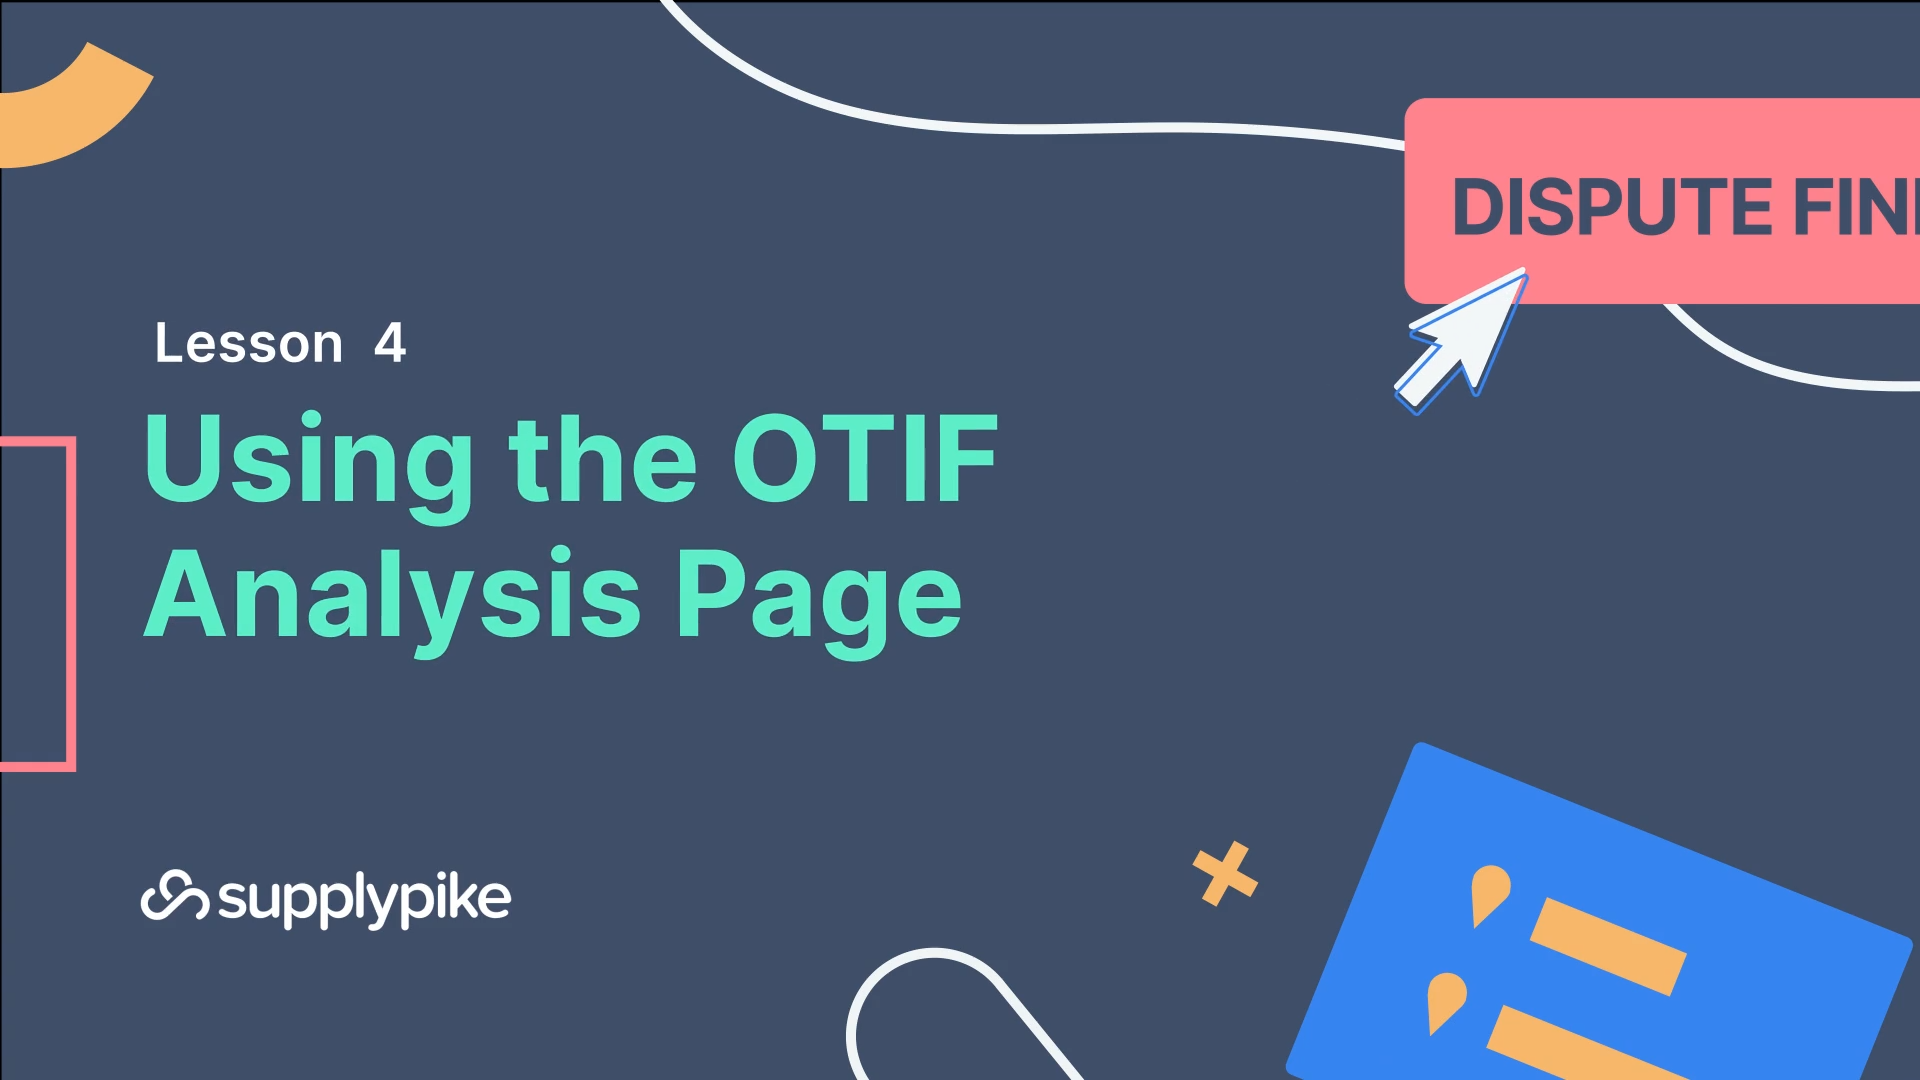 Lesson 4: Using the OTIF Analysis Page